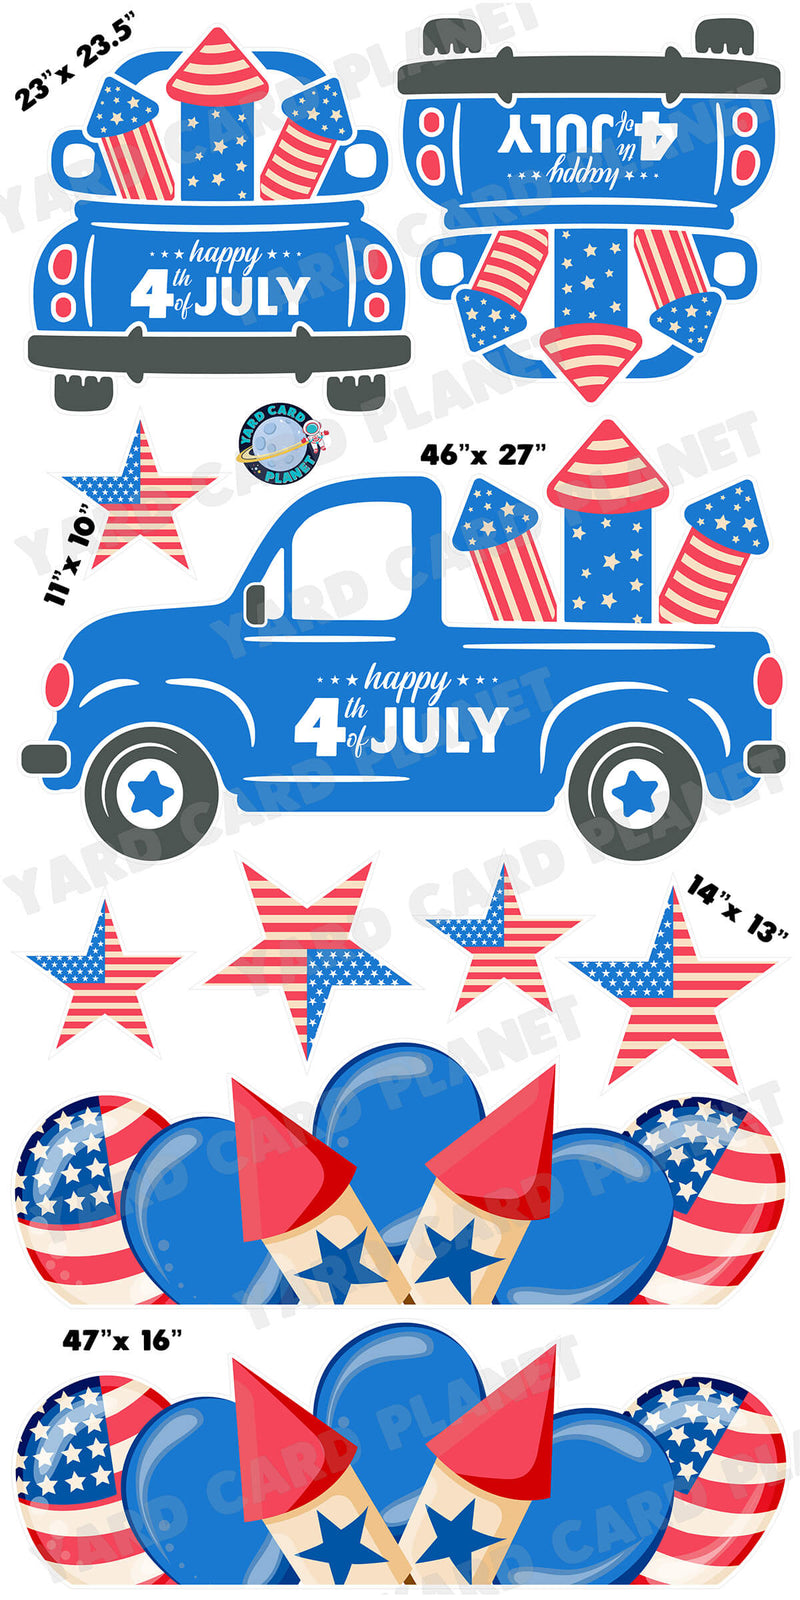 4th of July Independence Day Fireworks Pickup Truck, EZ Filler Balloons and Stars Yard Card Flair Set